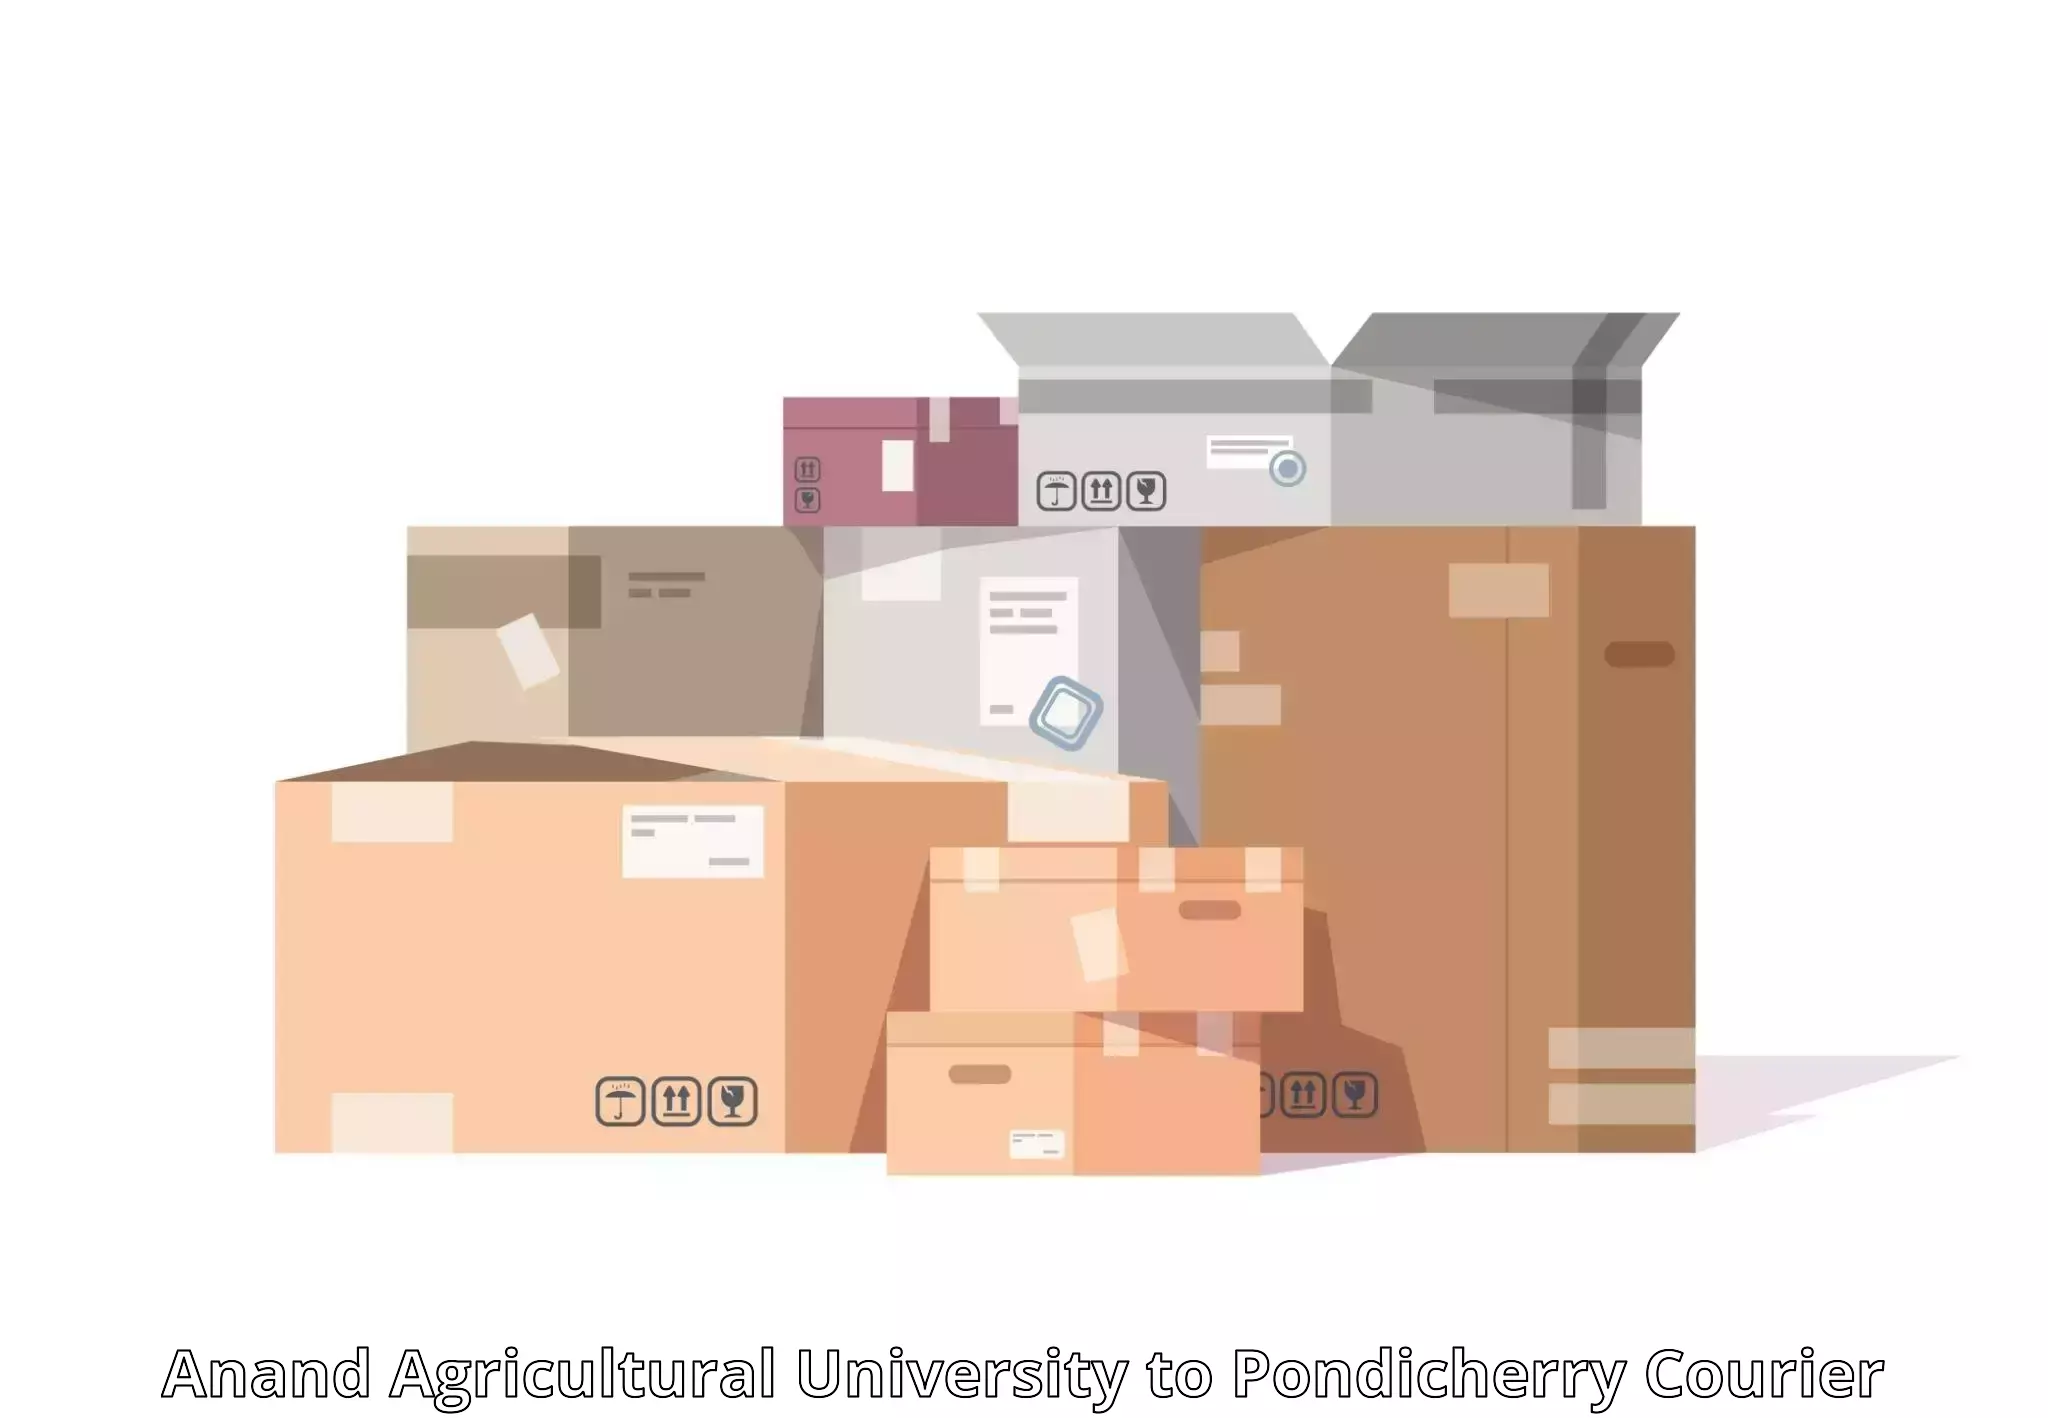 Personal parcel delivery Anand Agricultural University to Metttupalayam